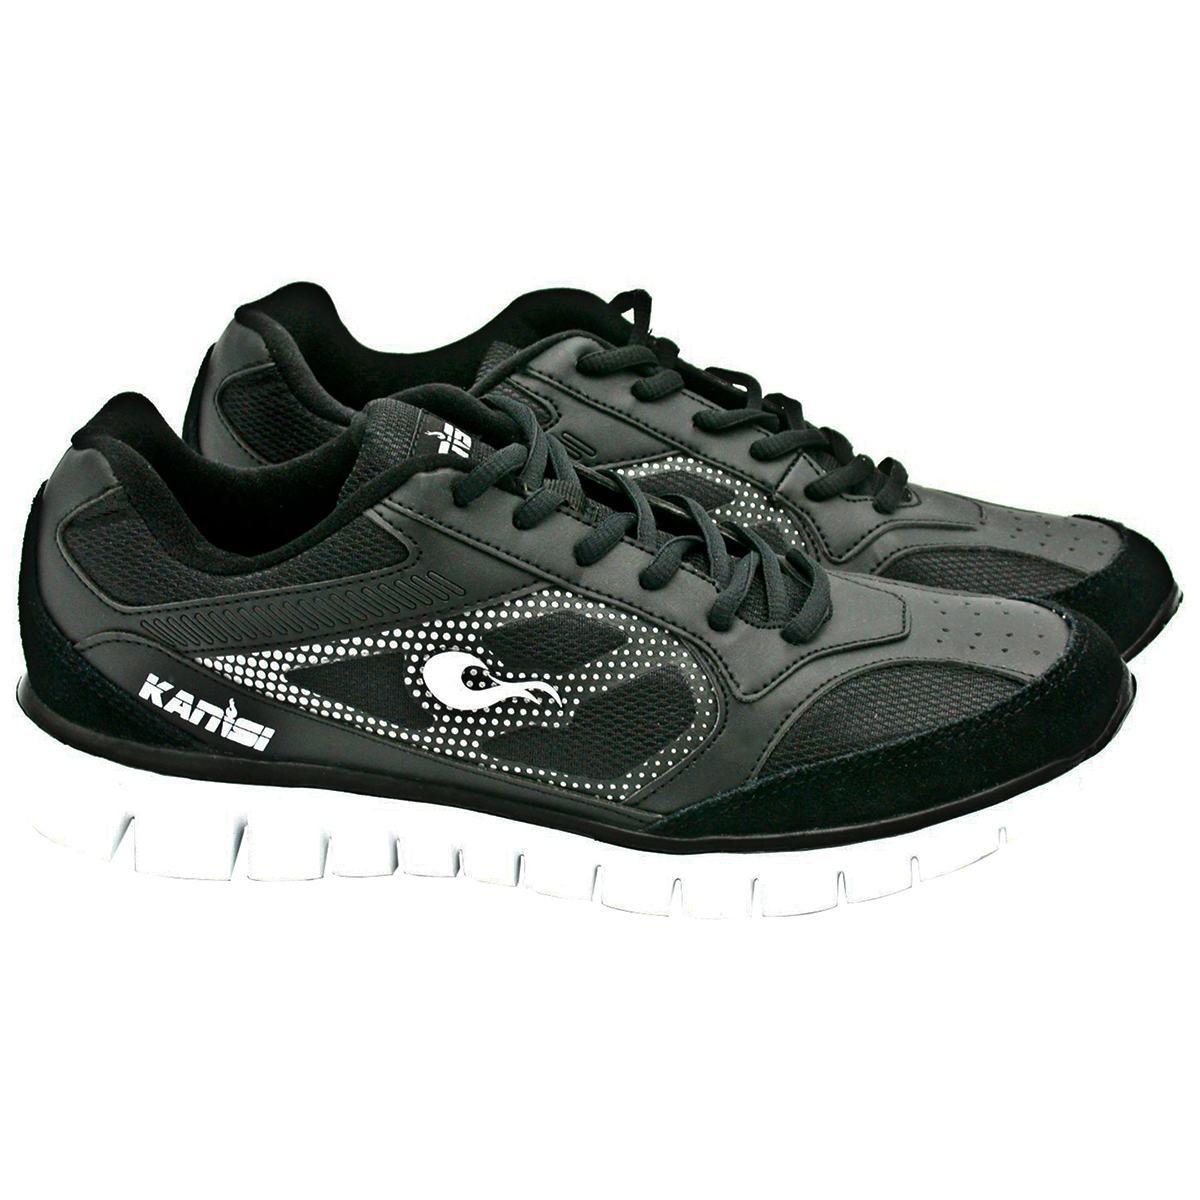 Kanisi Boxing Trainer and Running Shoes - 11 - Black/White - image 1 of 4